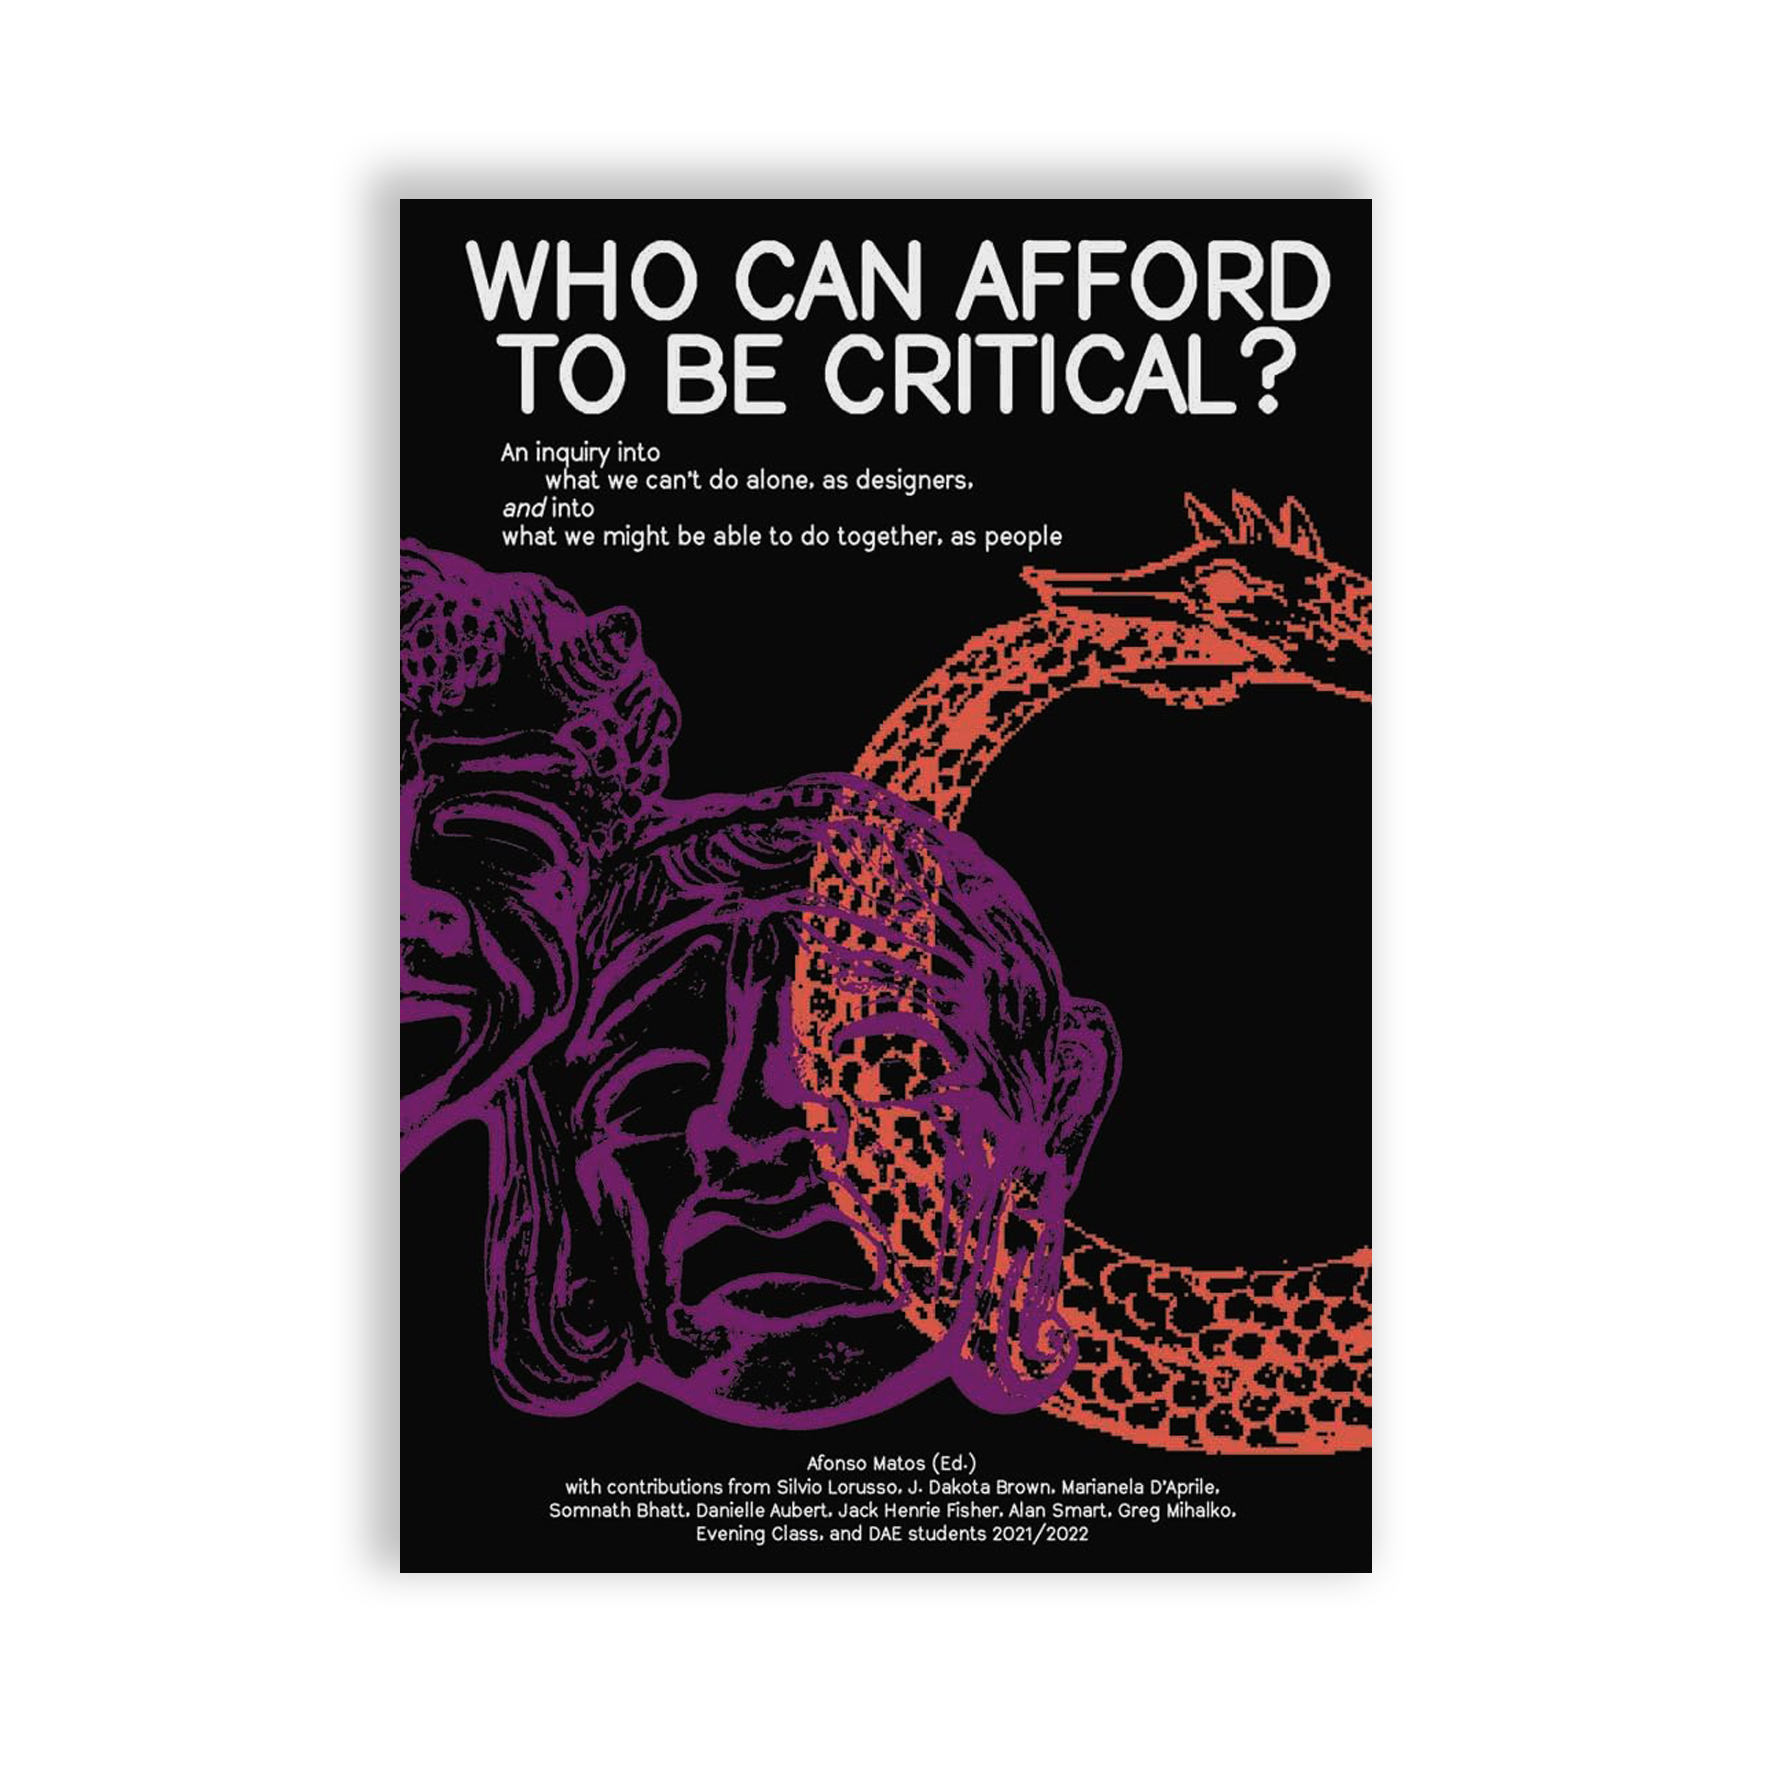 Who can afford to be critical?